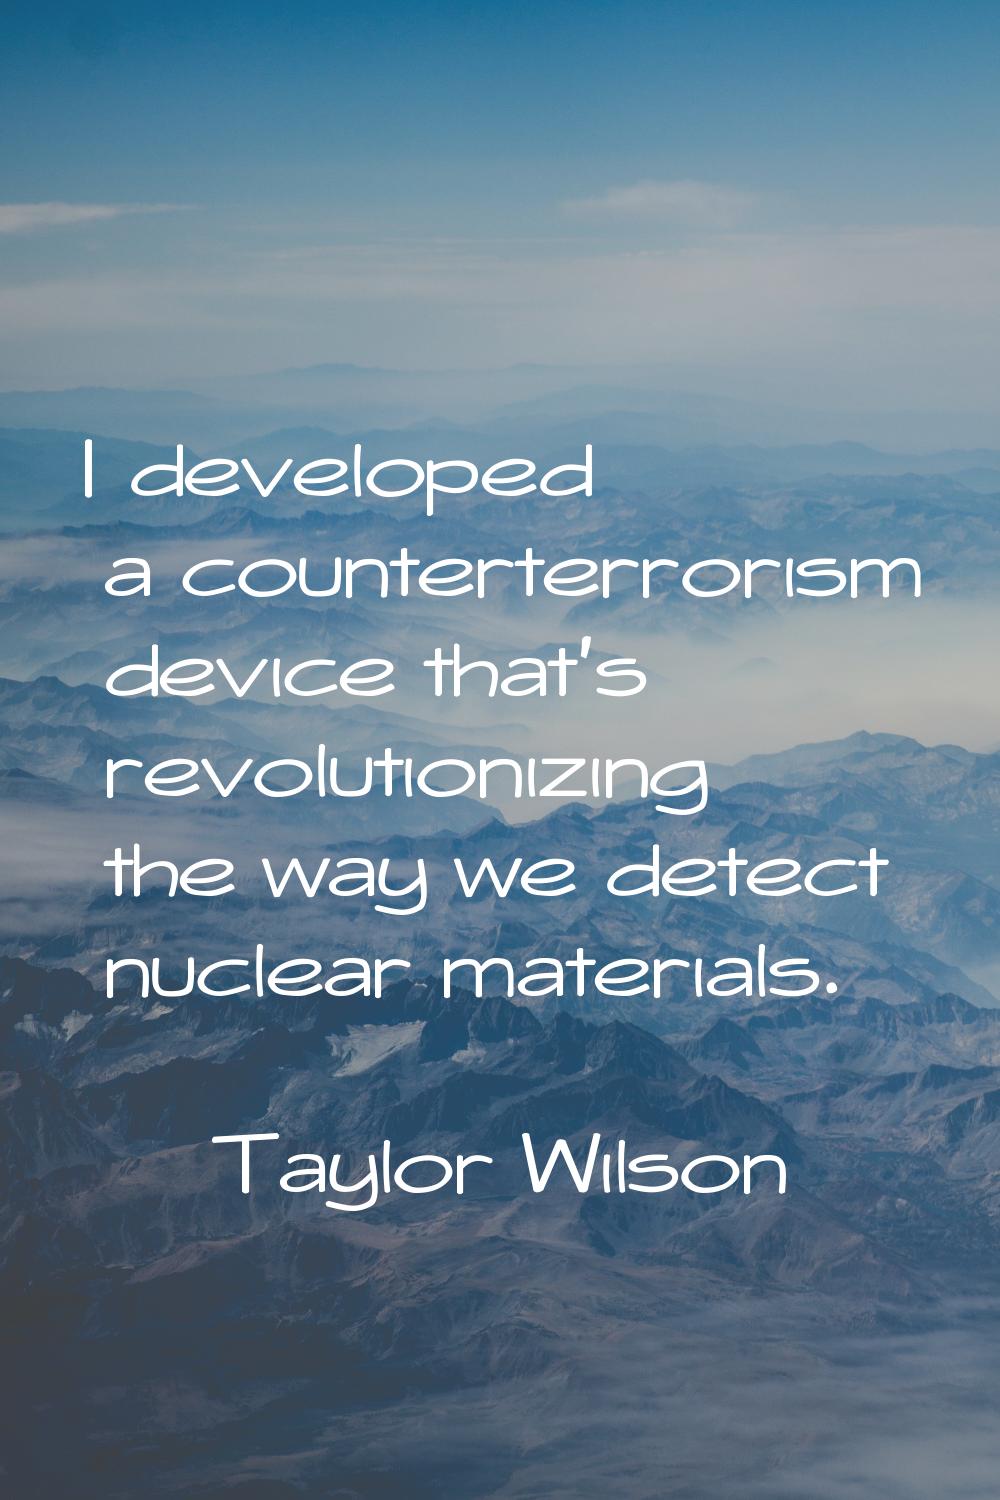 I developed a counterterrorism device that's revolutionizing the way we detect nuclear materials.